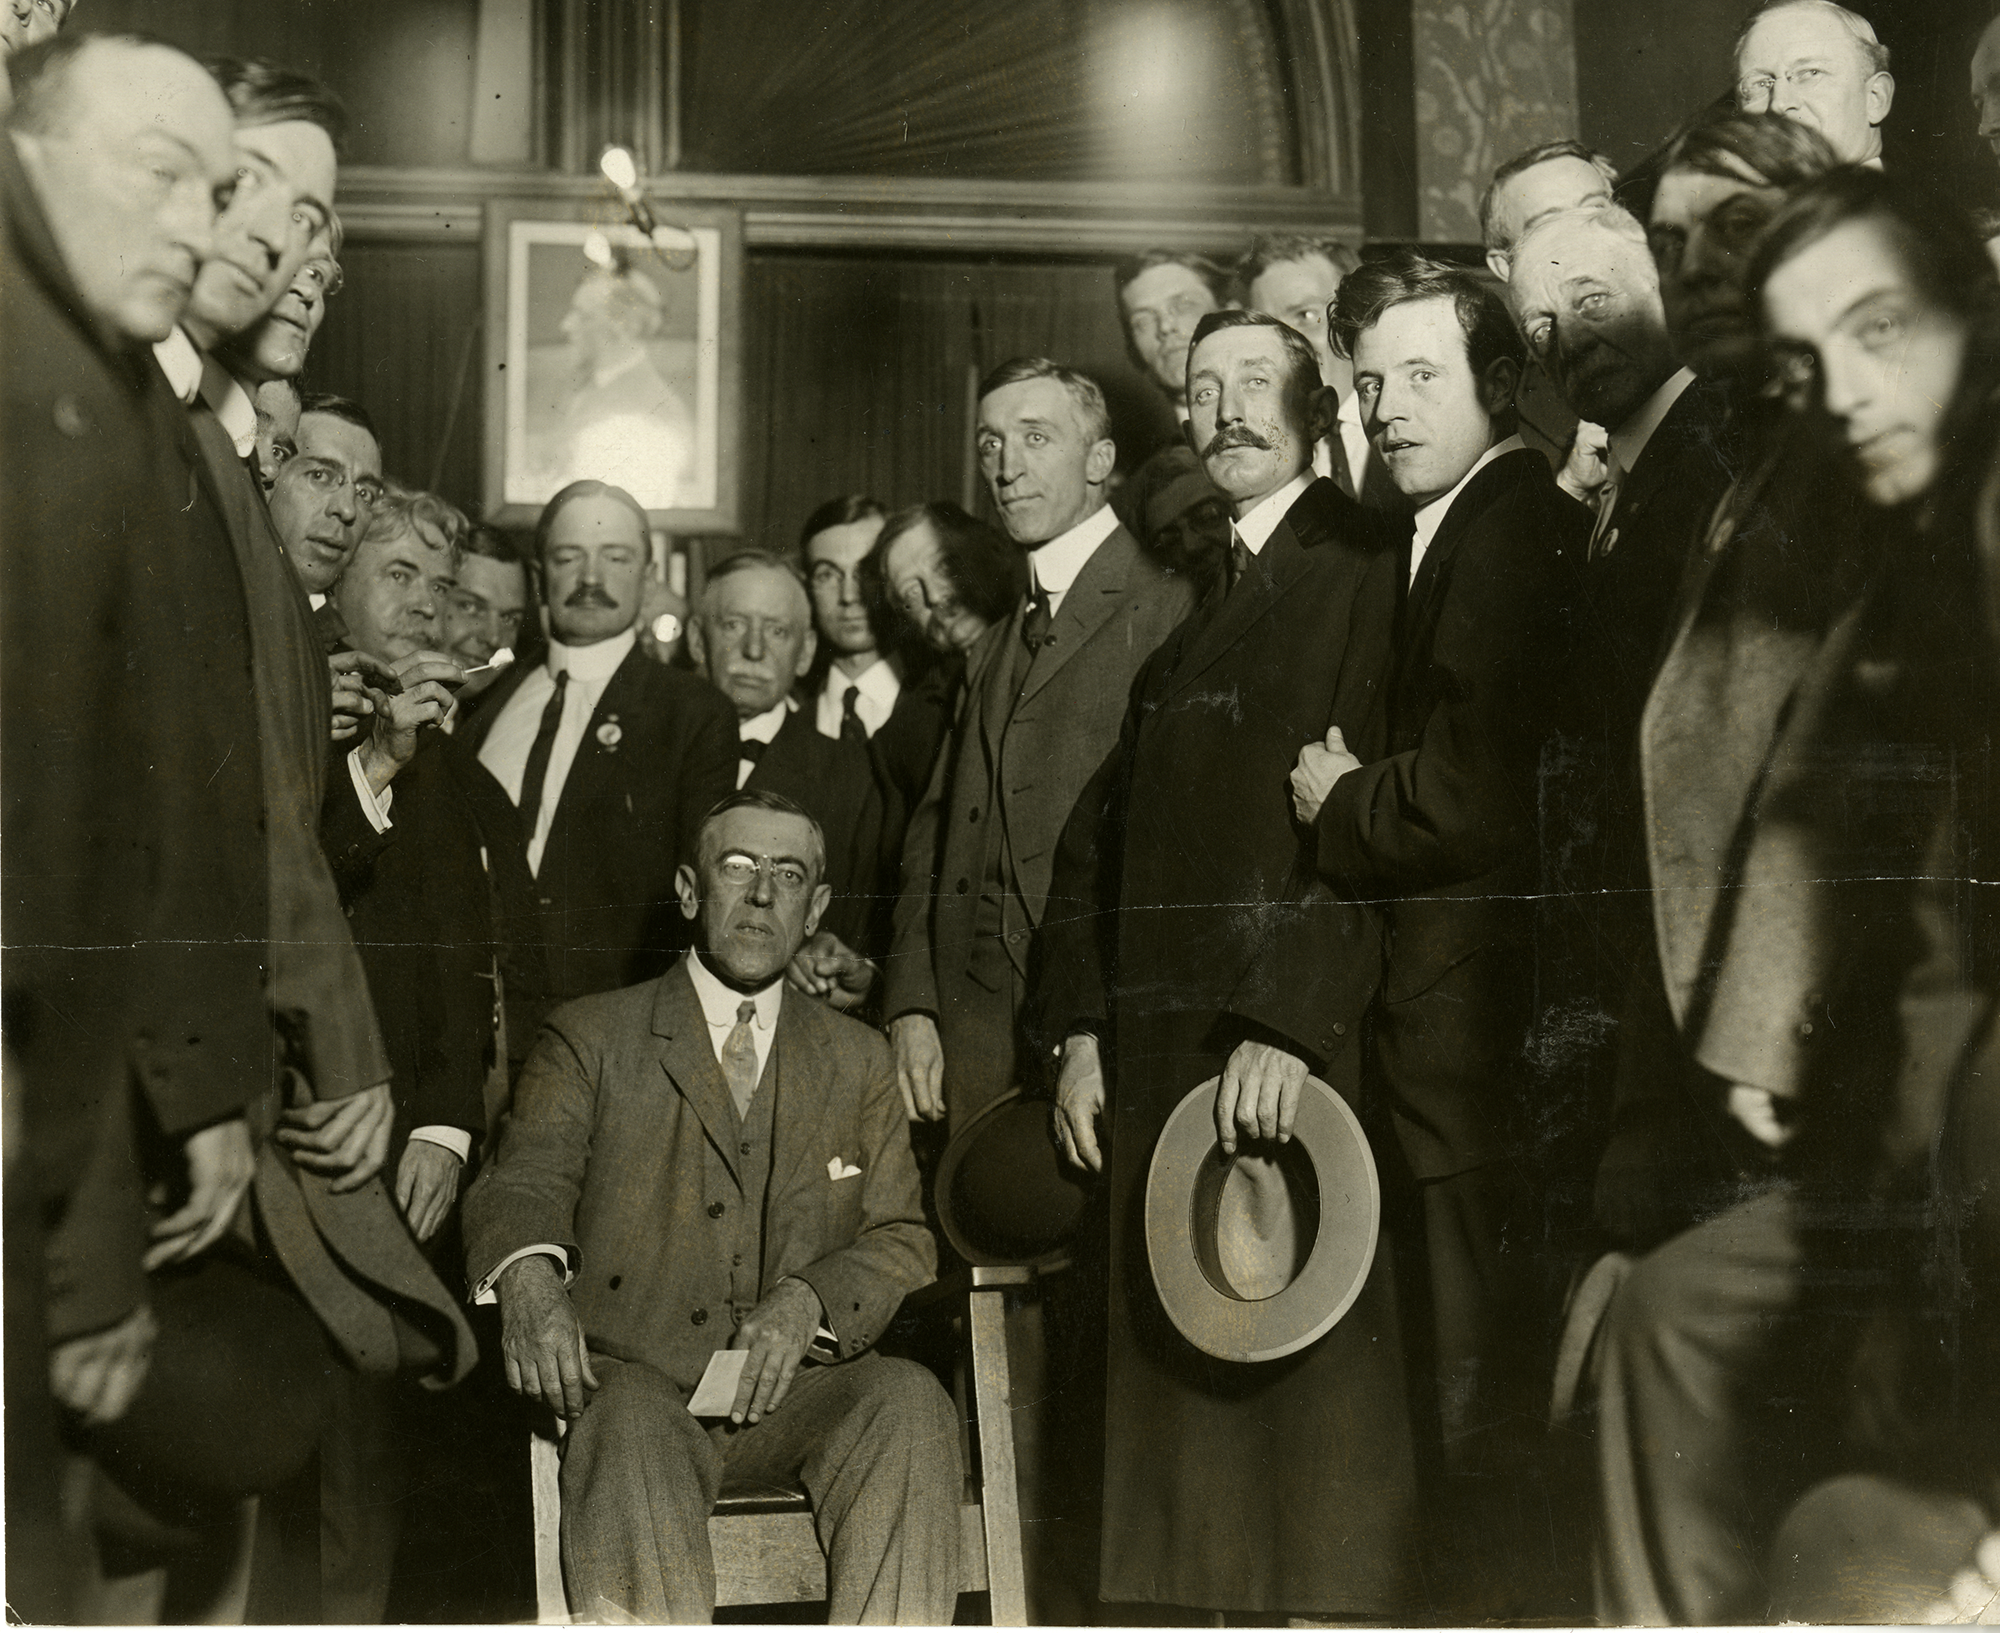 Woodrow Wilson sitting in a chair, surrounded by men in suits (members of the Denver Press Club).